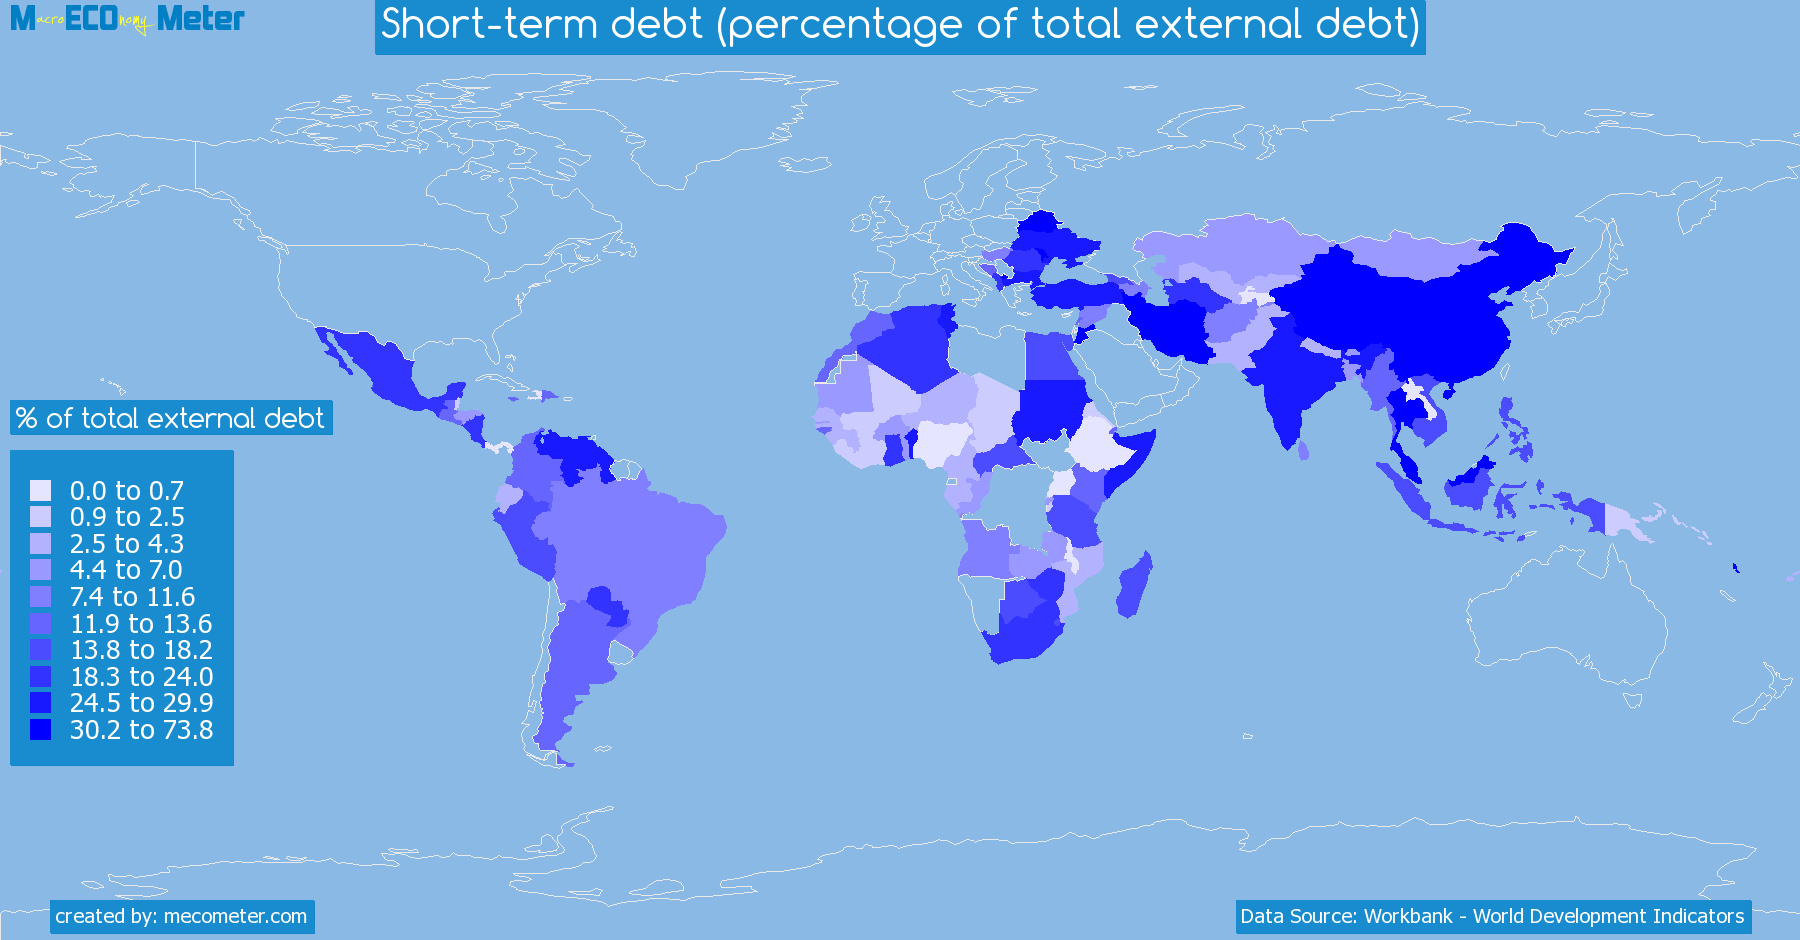 Worldmap of all countries colored to reflect the values of Short-term debt (percentage of total external debt)